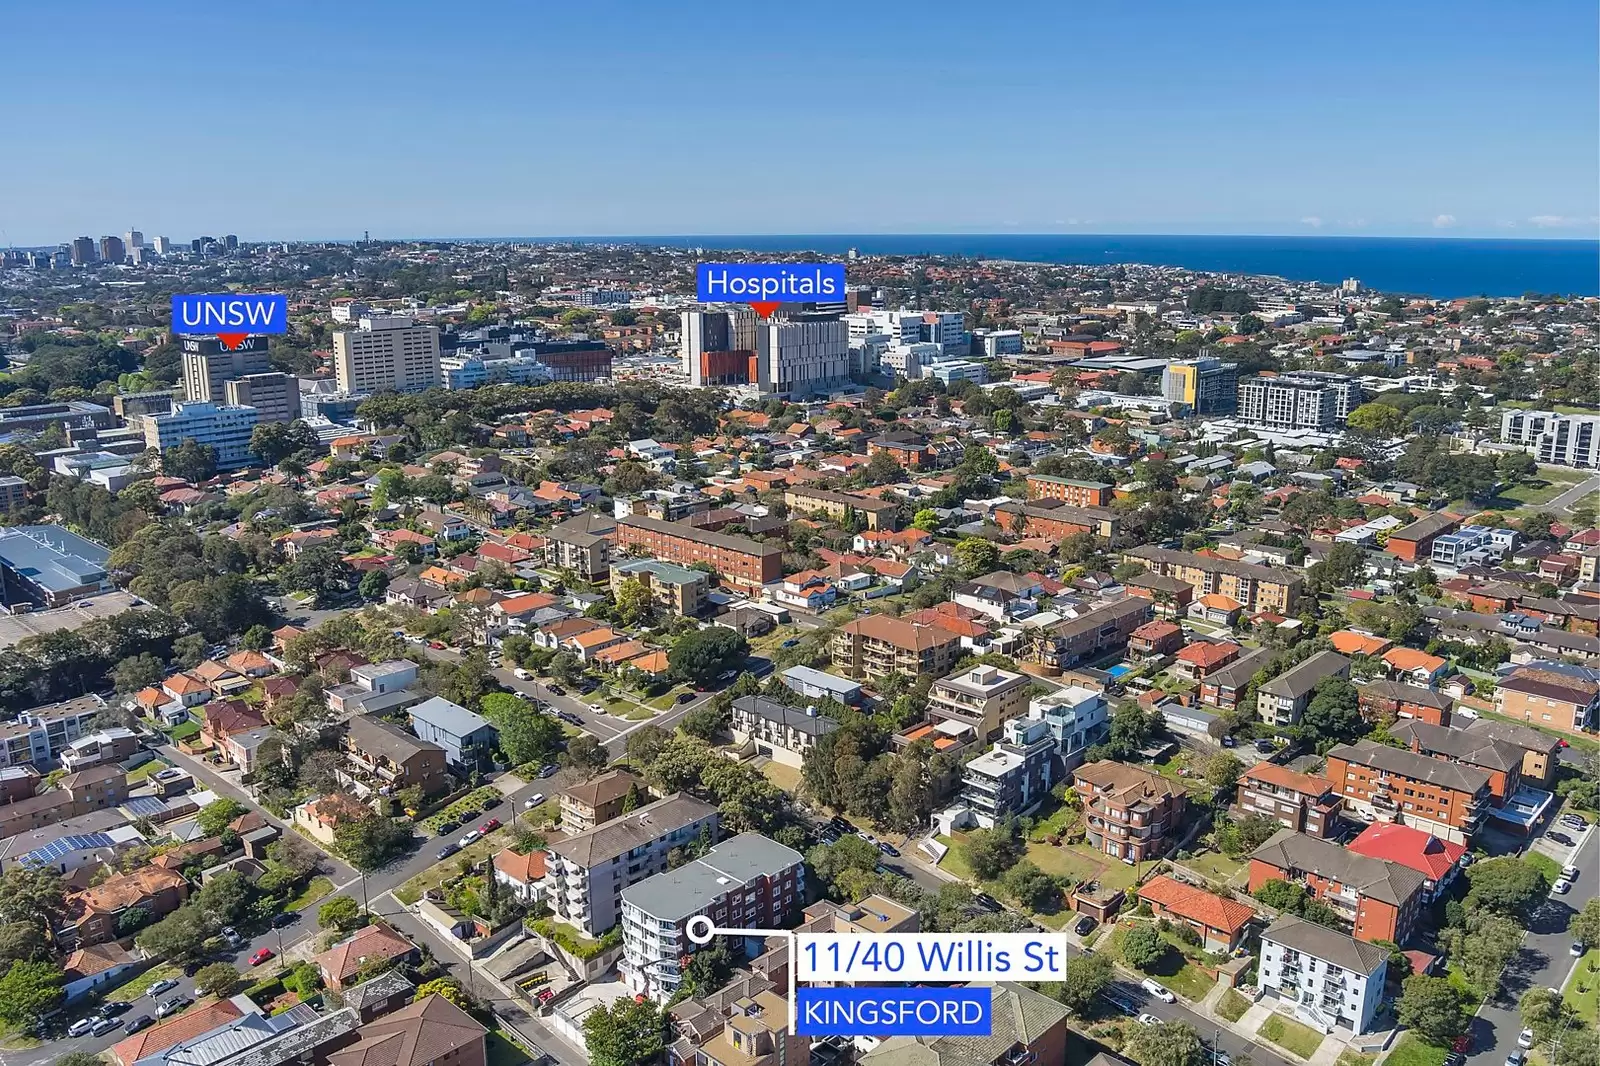 Photo #10: 11/40 Willis St, Kingsford - Sold by Sydney Sotheby's International Realty